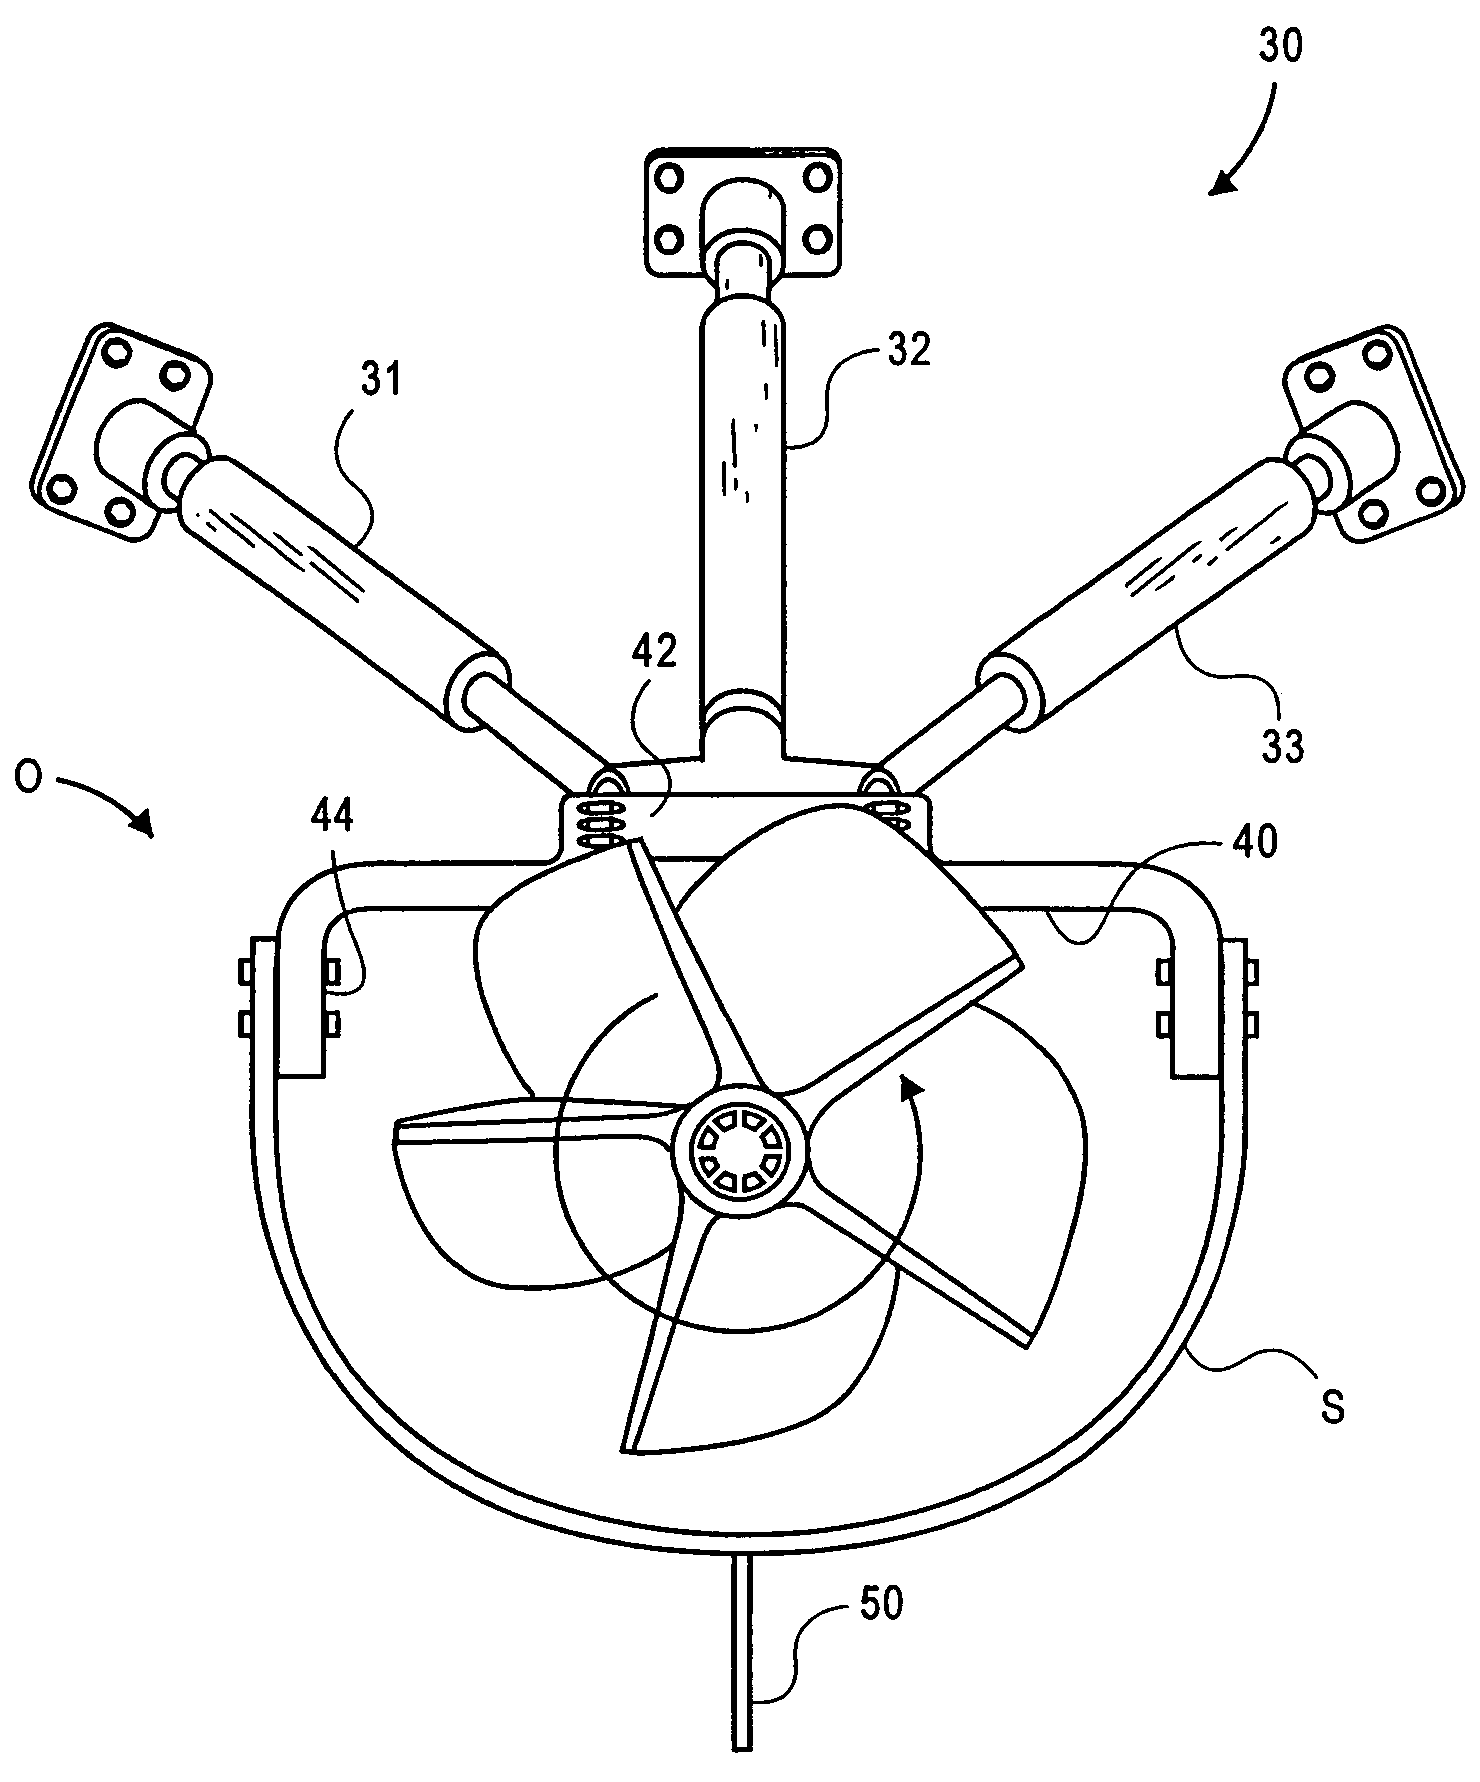 Shroud enclosed inverted surface piercing propeller outdrive